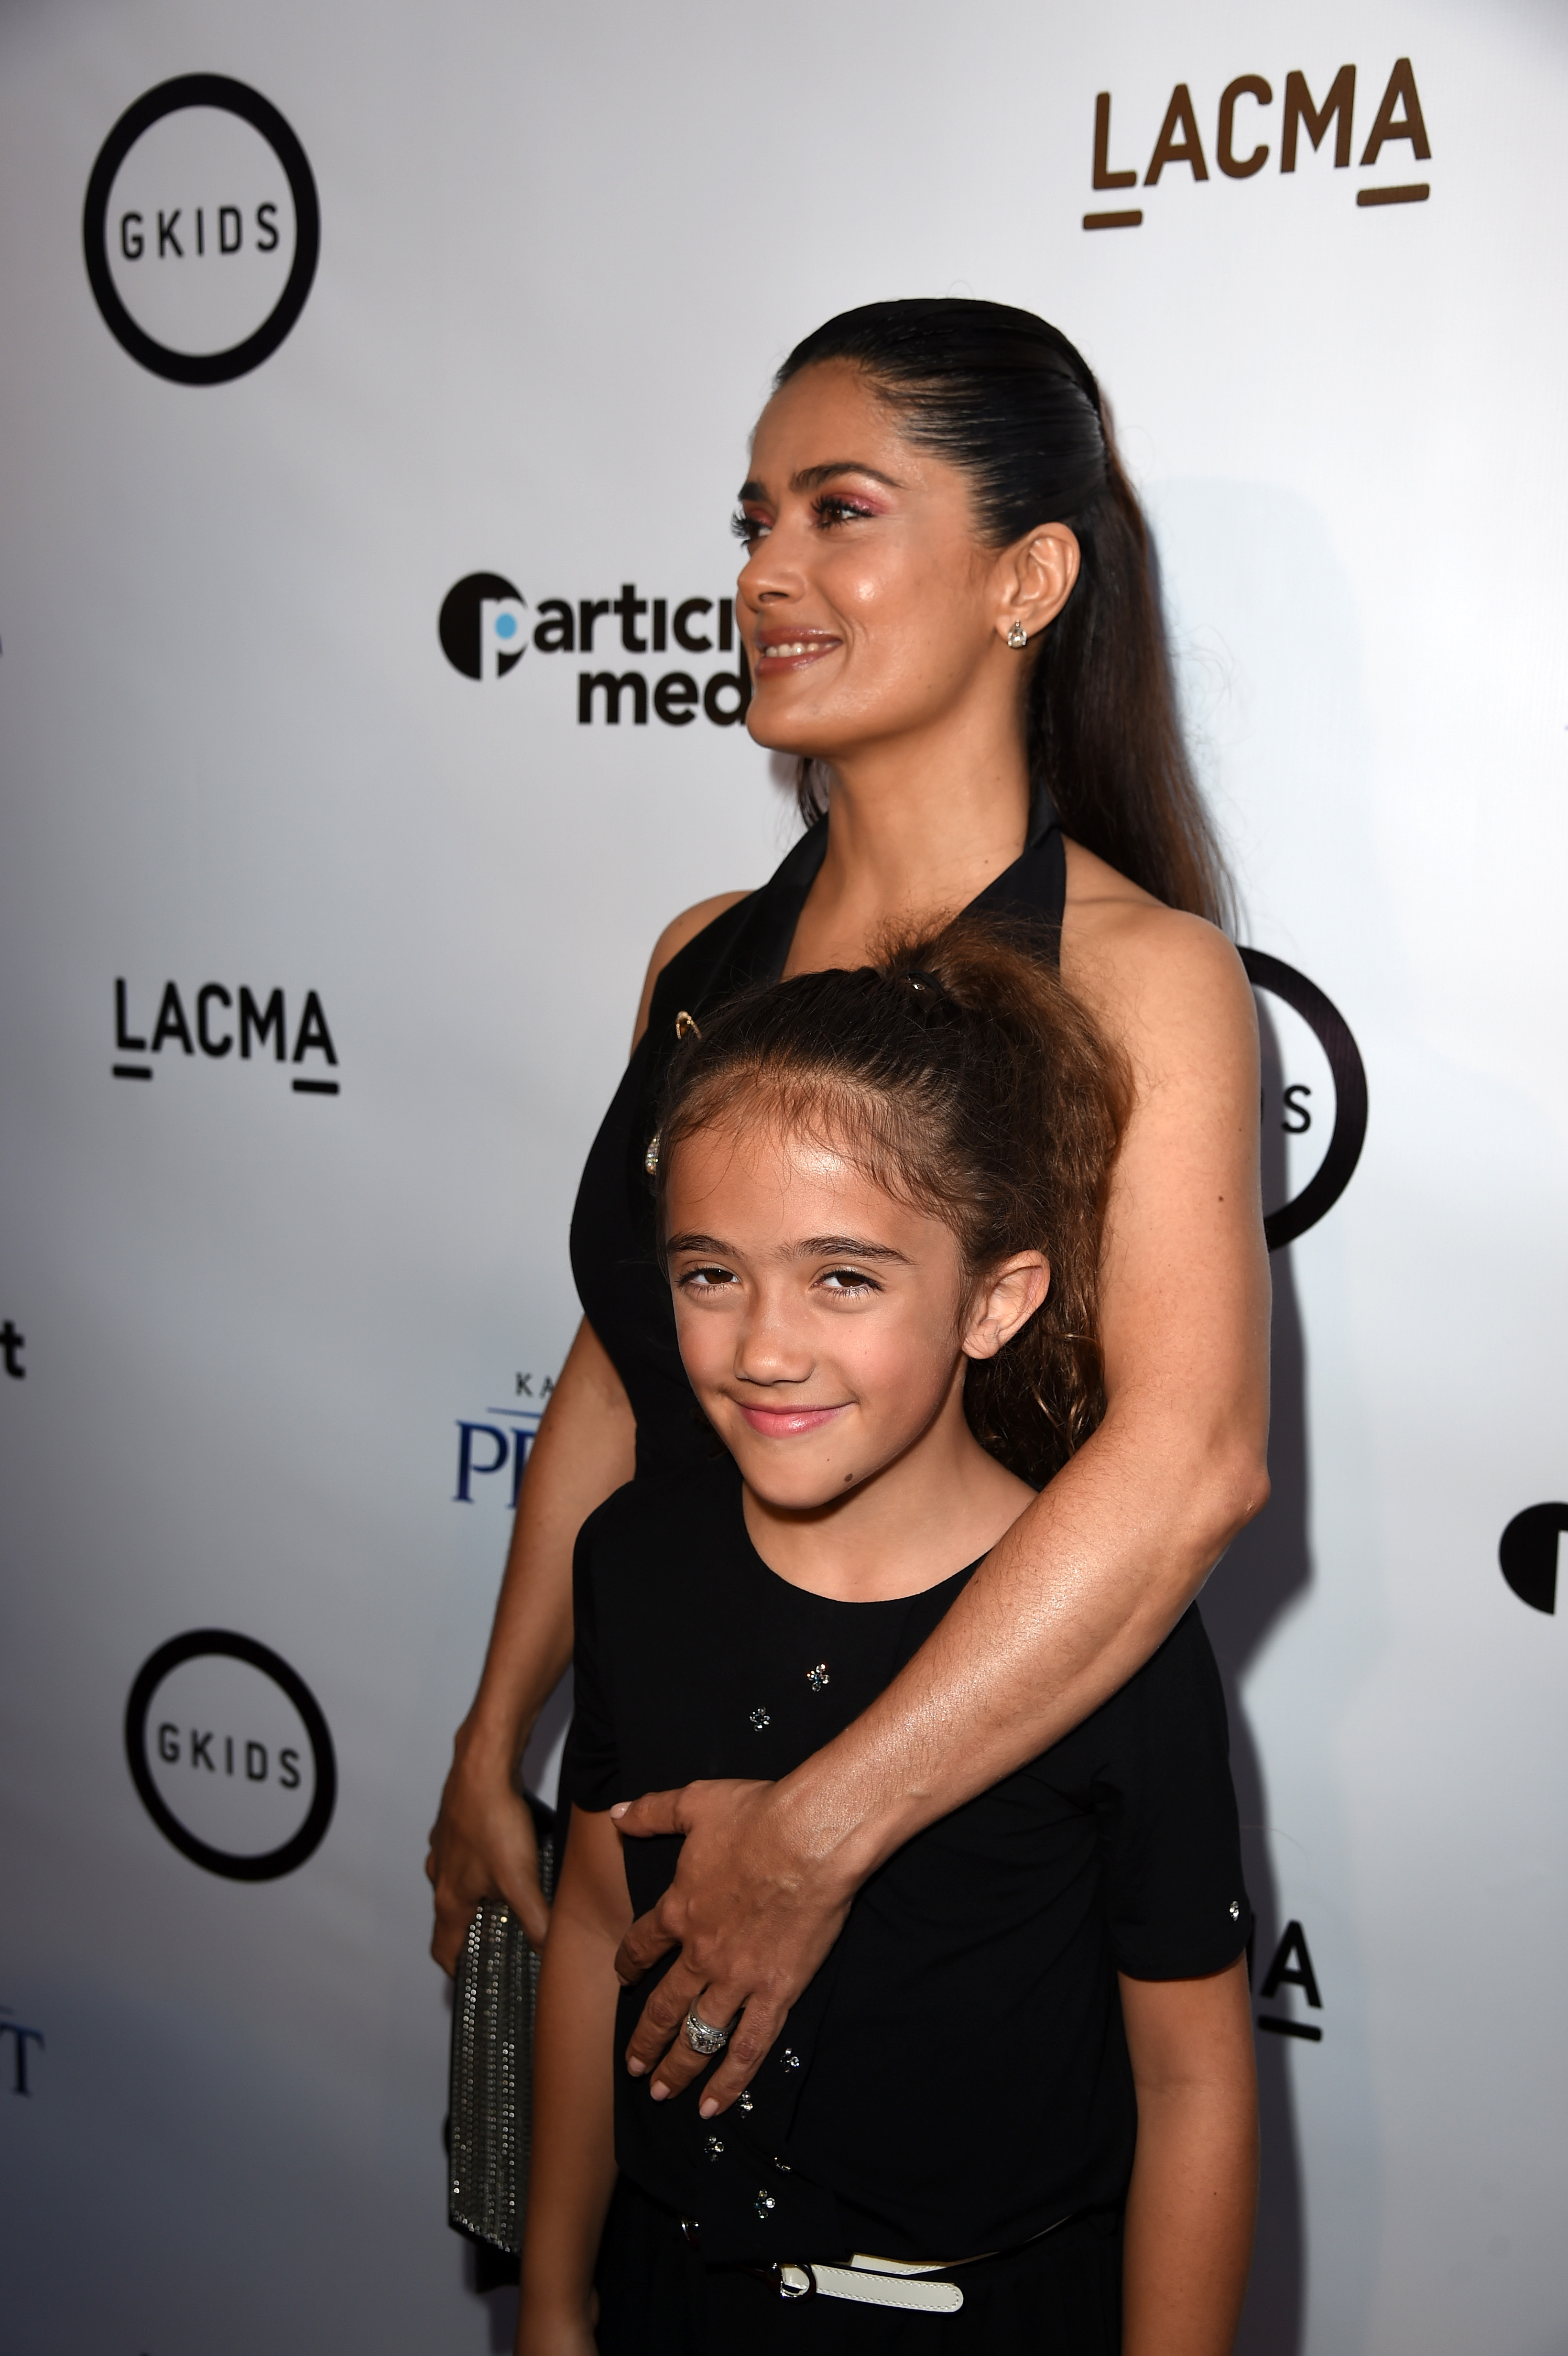 Salma Hayek Pinault and daughter Valentina Paloma Pinault attend the screening of GKIDS' "Kahlil Gibran's the Prophet" at Bing Theatre at LACMA on July 29, 2015 in Los Angeles, California | Source: Getty Images